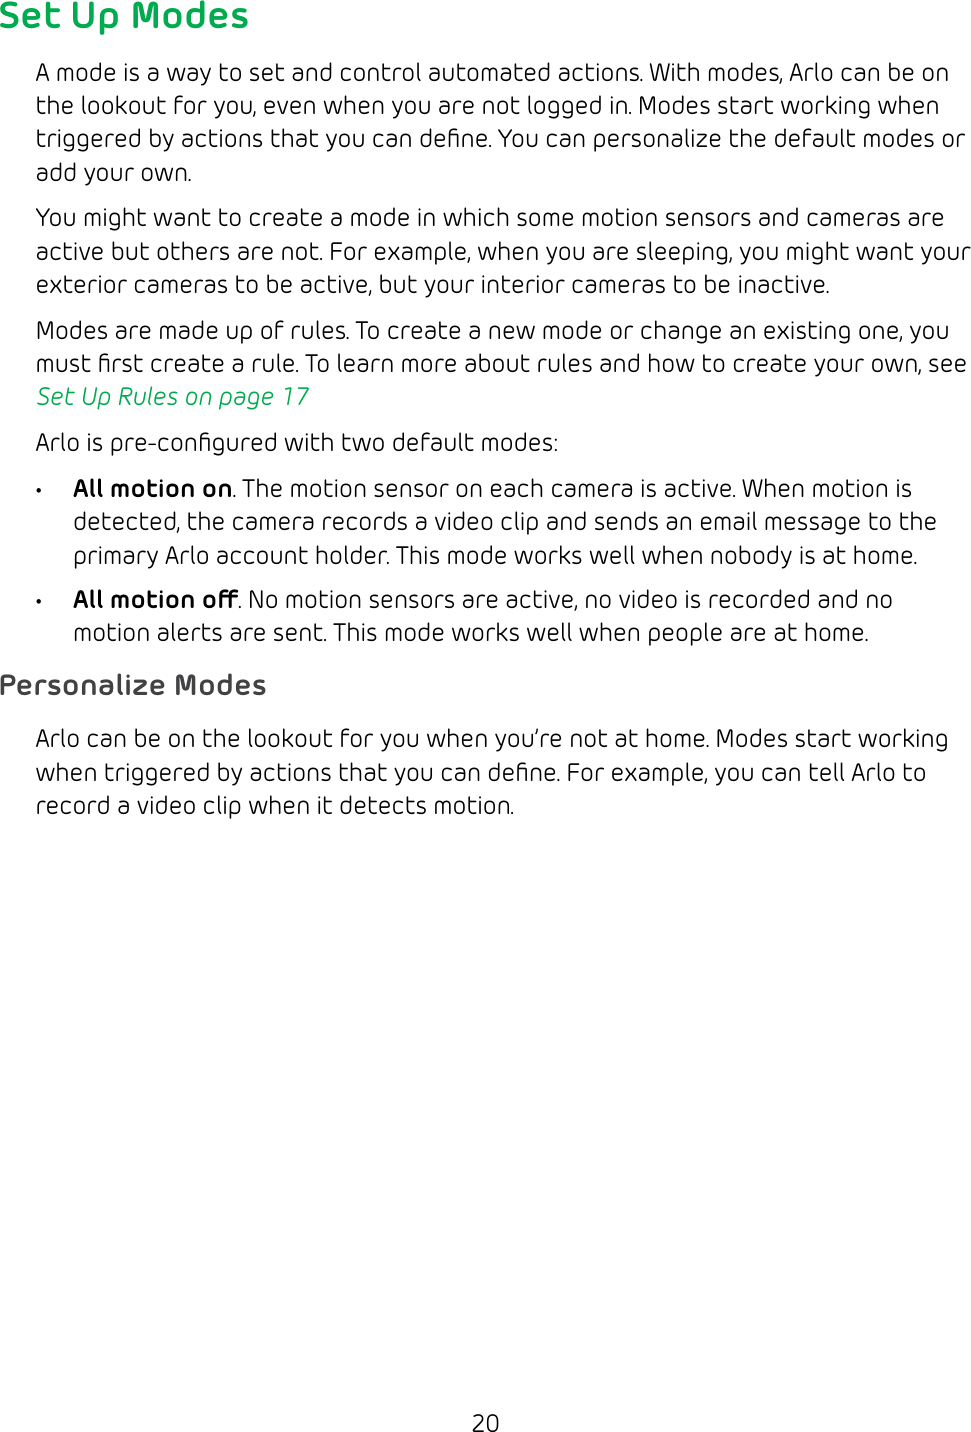 20Set Up ModesA mode is a way to set and control automated actions. With modes, Arlo can be on the lookout for you, even when you are not logged in. Modes start working when triggered by actions that you can deﬁne. You can personalize the default modes or add your own. You might want to create a mode in which some motion sensors and cameras are active but others are not. For example, when you are sleeping, you might want your exterior cameras to be active, but your interior cameras to be inactive.Modes are made up of rules. To create a new mode or change an existing one, you must ﬁrst create a rule. To learn more about rules and how to create your own, see Set Up Rules on page 17Arlo is pre‑conﬁgured with two default modes:• All motion on. The motion sensor on each camera is active. When motion is detected, the camera records a video clip and sends an email message to the primary Arlo account holder. This mode works well when nobody is at home.• All motion o. No motion sensors are active, no video is recorded and no motion alerts are sent. This mode works well when people are at home.Personalize ModesArlo can be on the lookout for you when you’re not at home. Modes start working when triggered by actions that you can deﬁne. For example, you can tell Arlo to record a video clip when it detects motion.